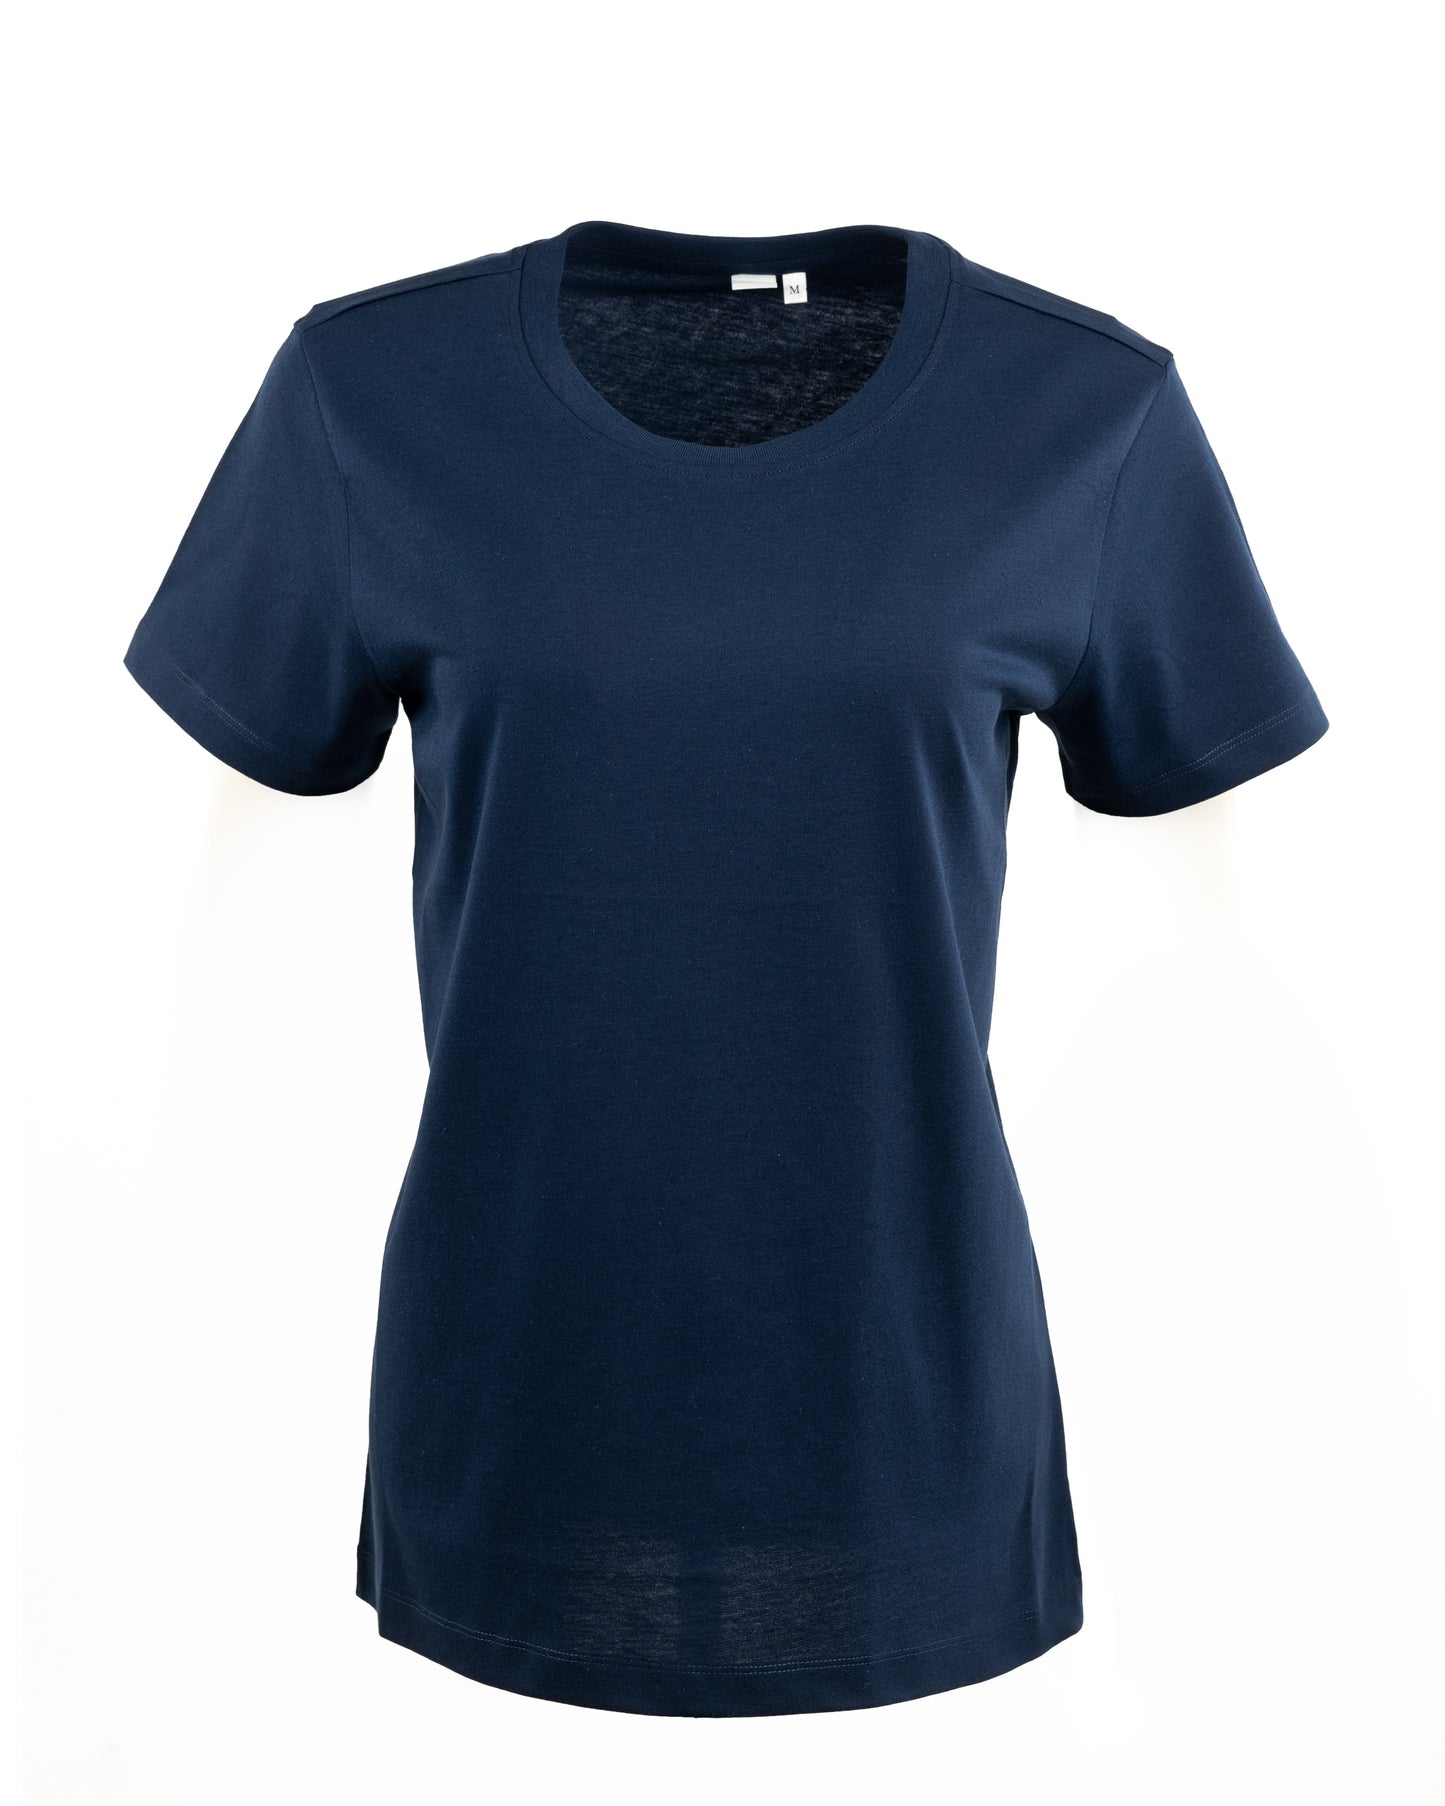 Lavos Women's Short Sleeve T-Shirt - 80% BCI-Cotton and 20% Polyester